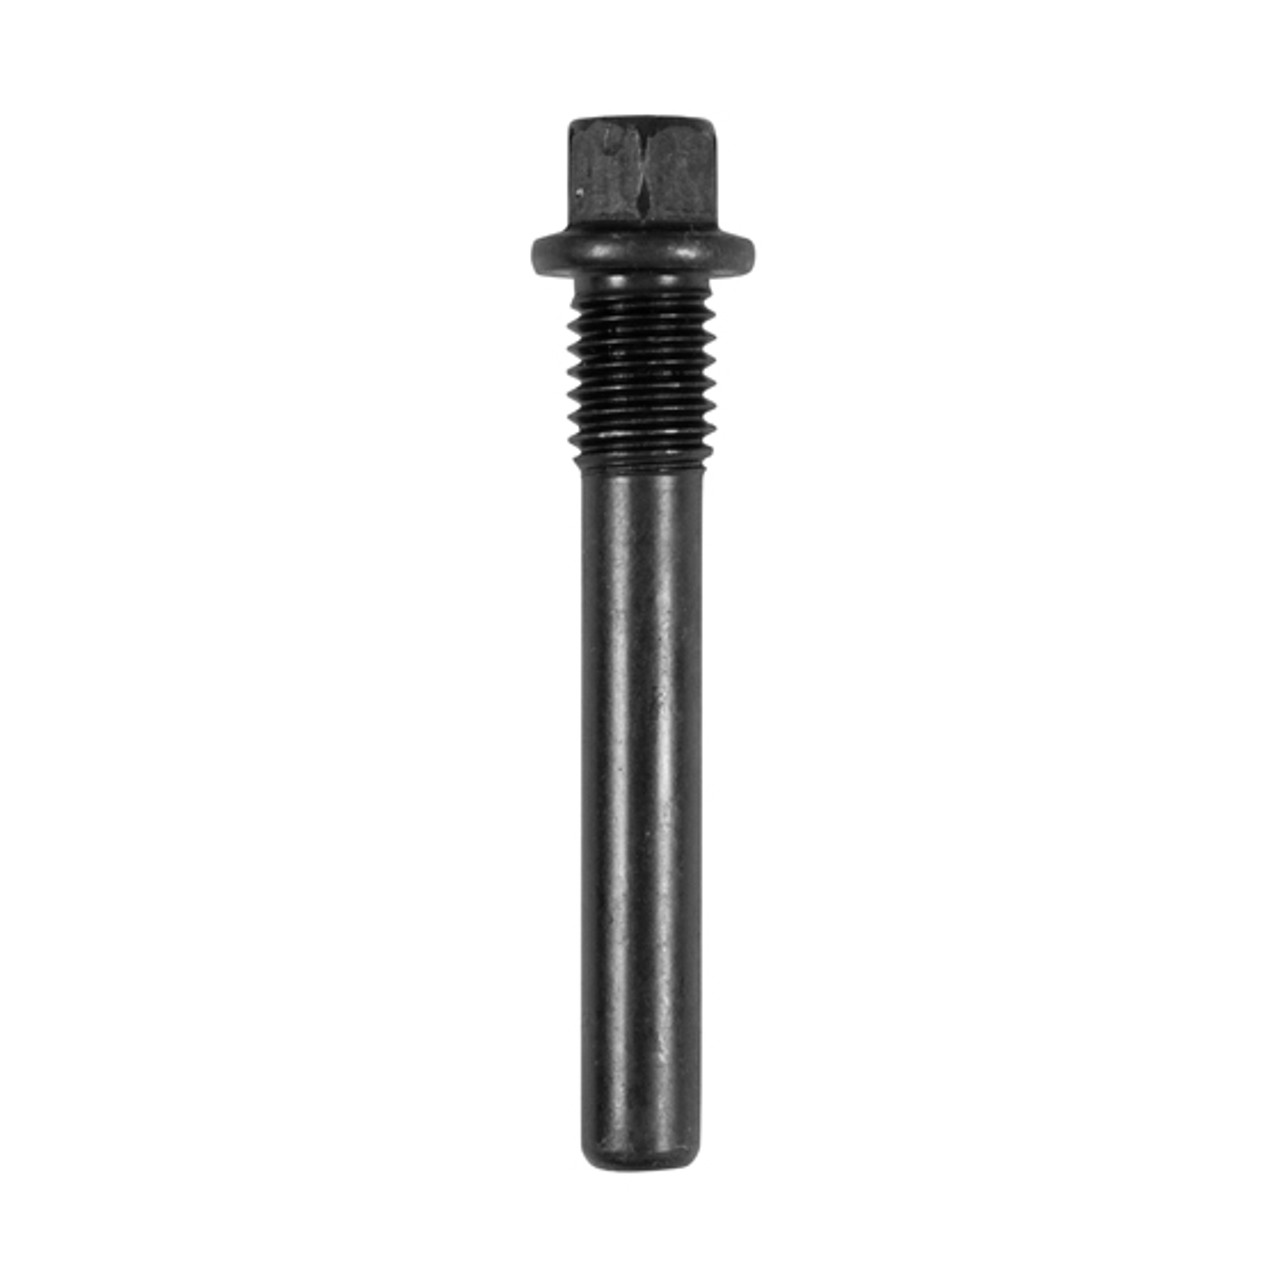 Standard Open and Gov-Loc cross pin bolt with M10x1.5 thread for 9.5" and 9.25" GM IFS